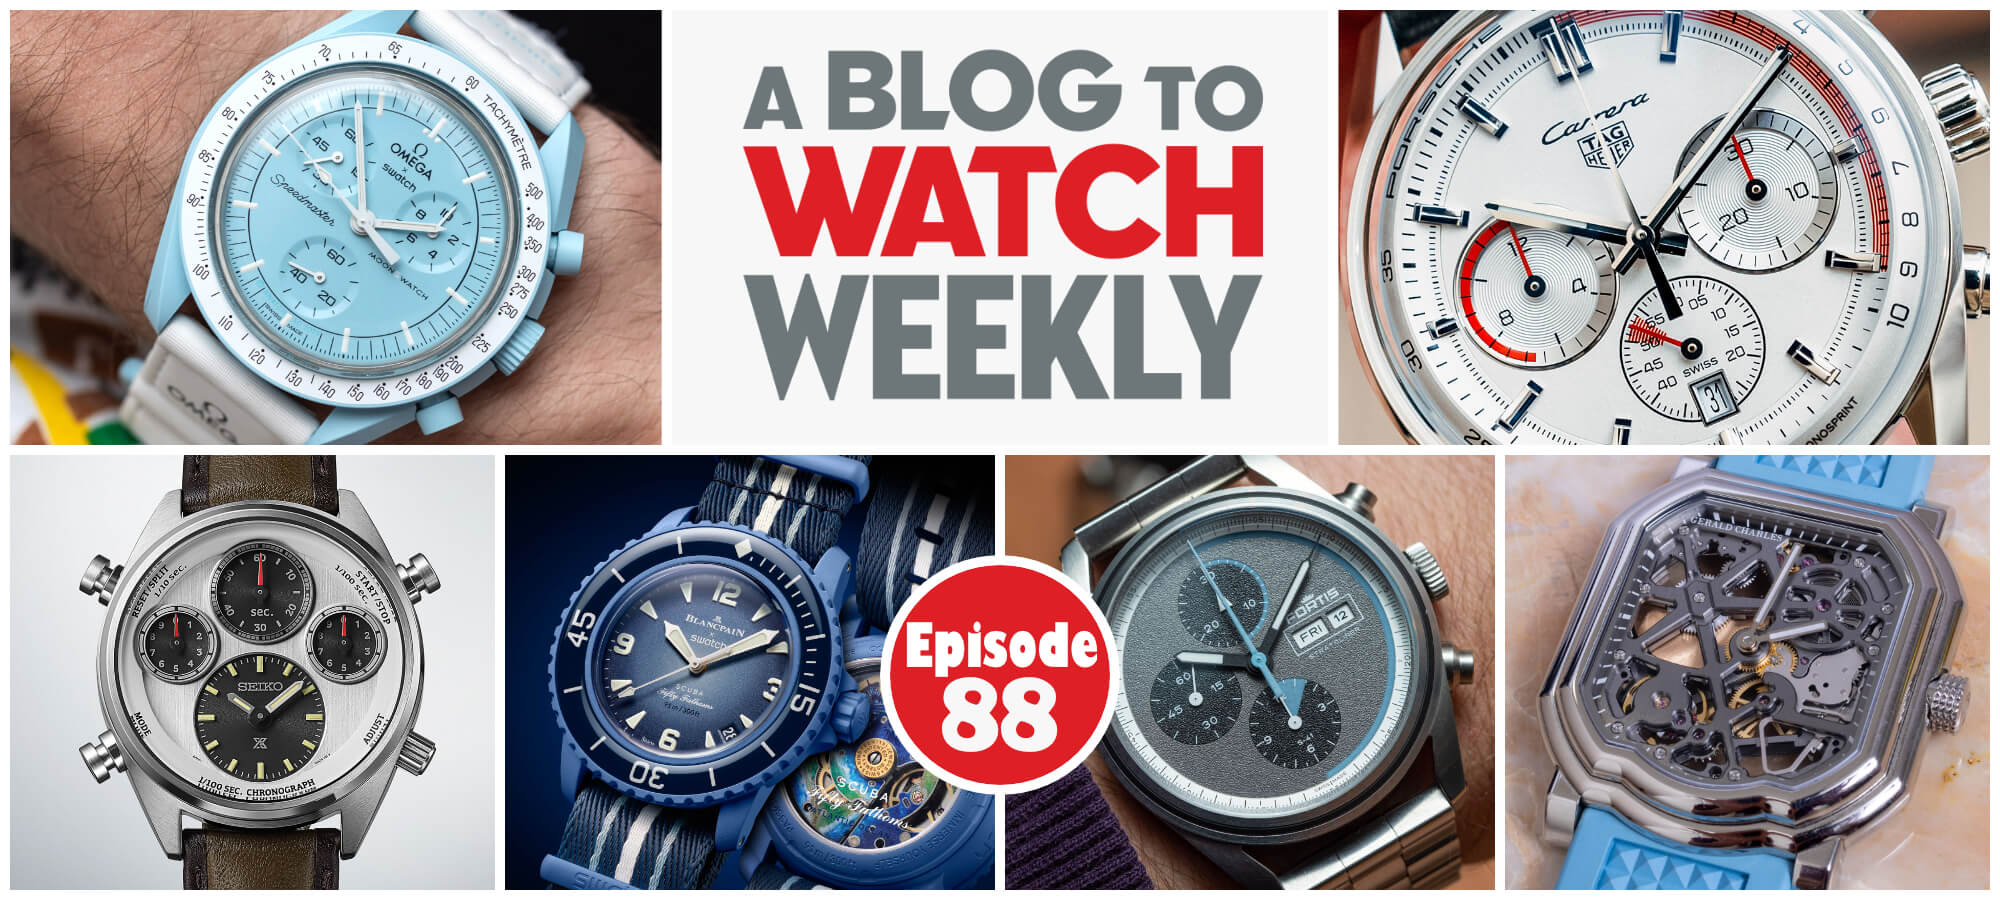 aBlogtoWatch Weekly Episode 88